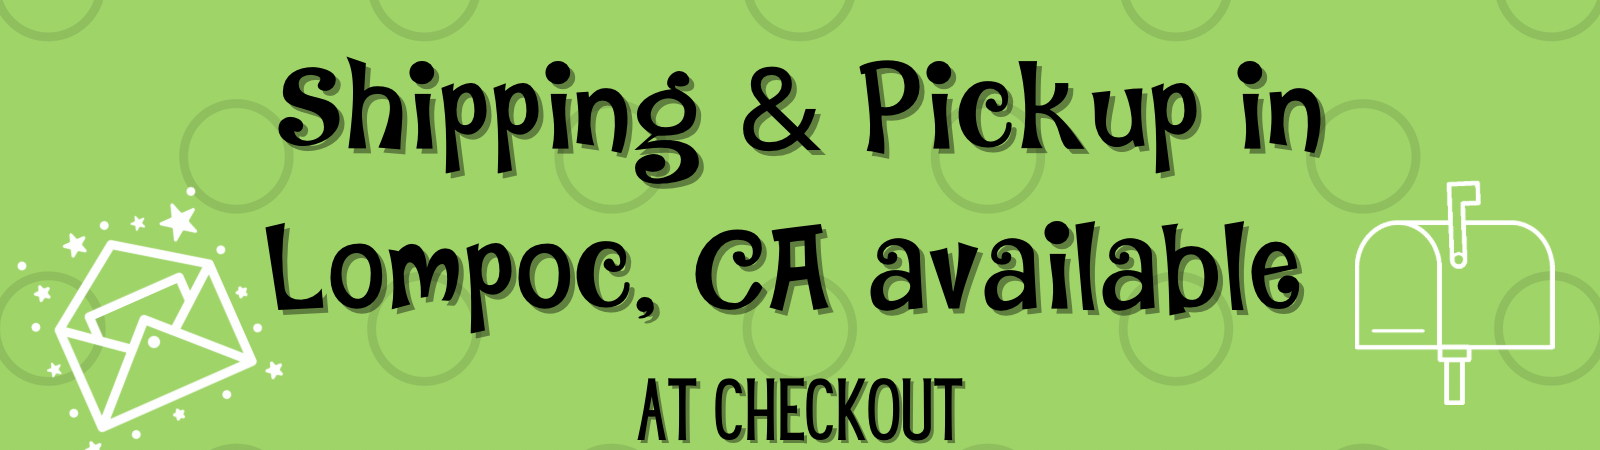 Shipping and pickup banner